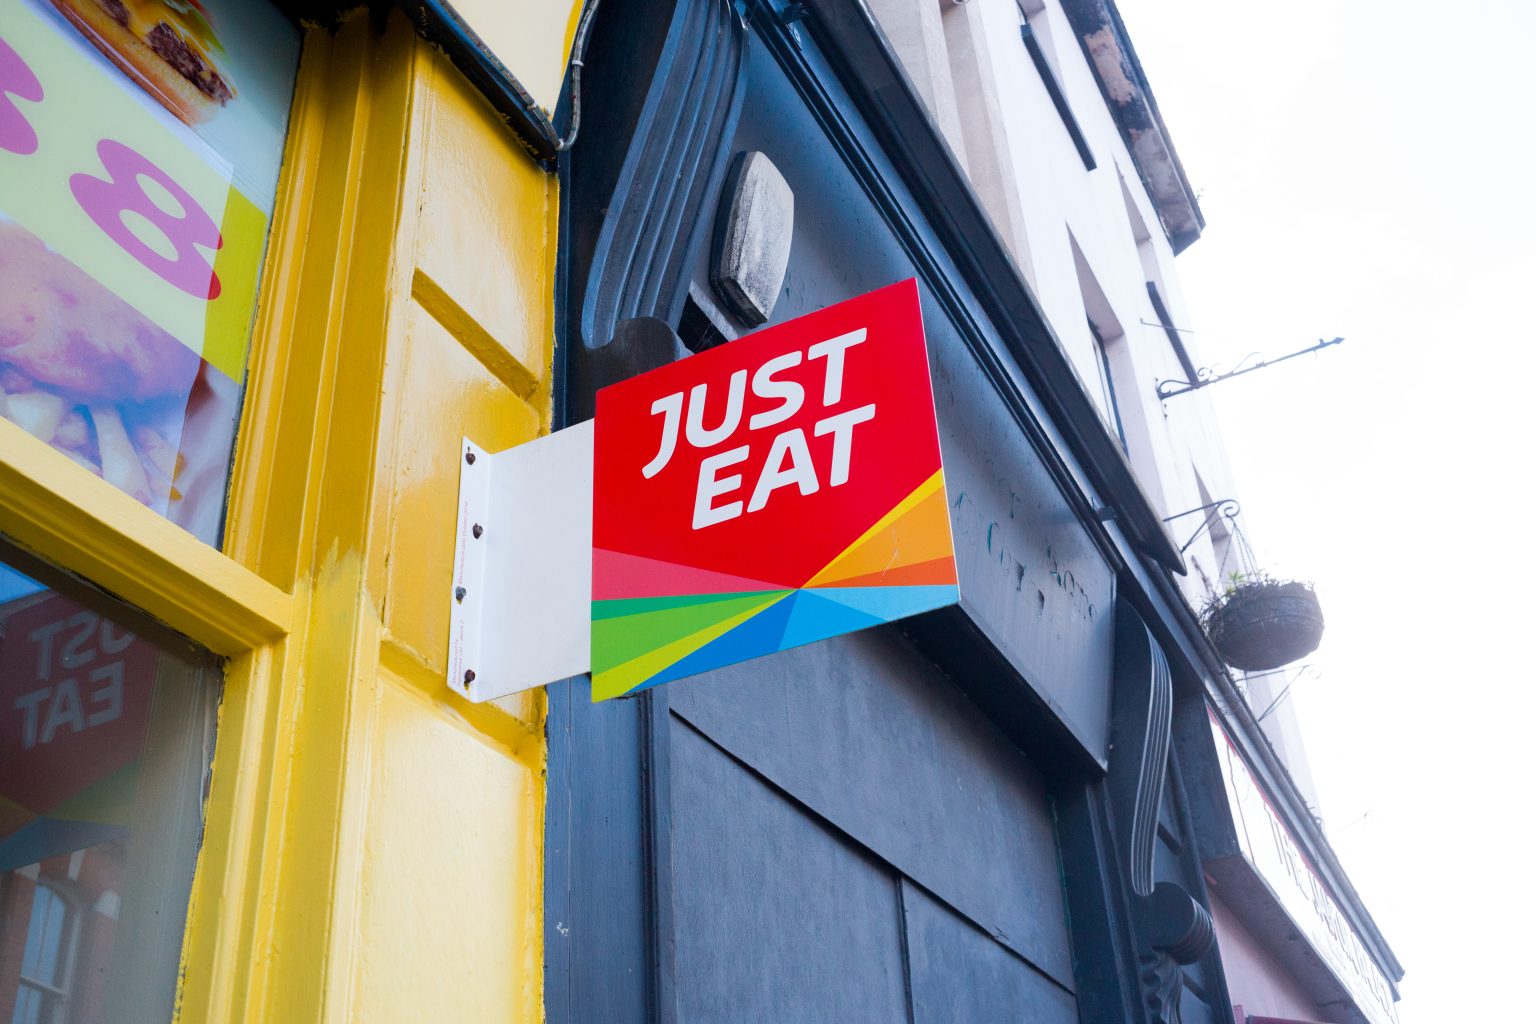 Just Eat for Business adds Wahaca and PAUL to its platform